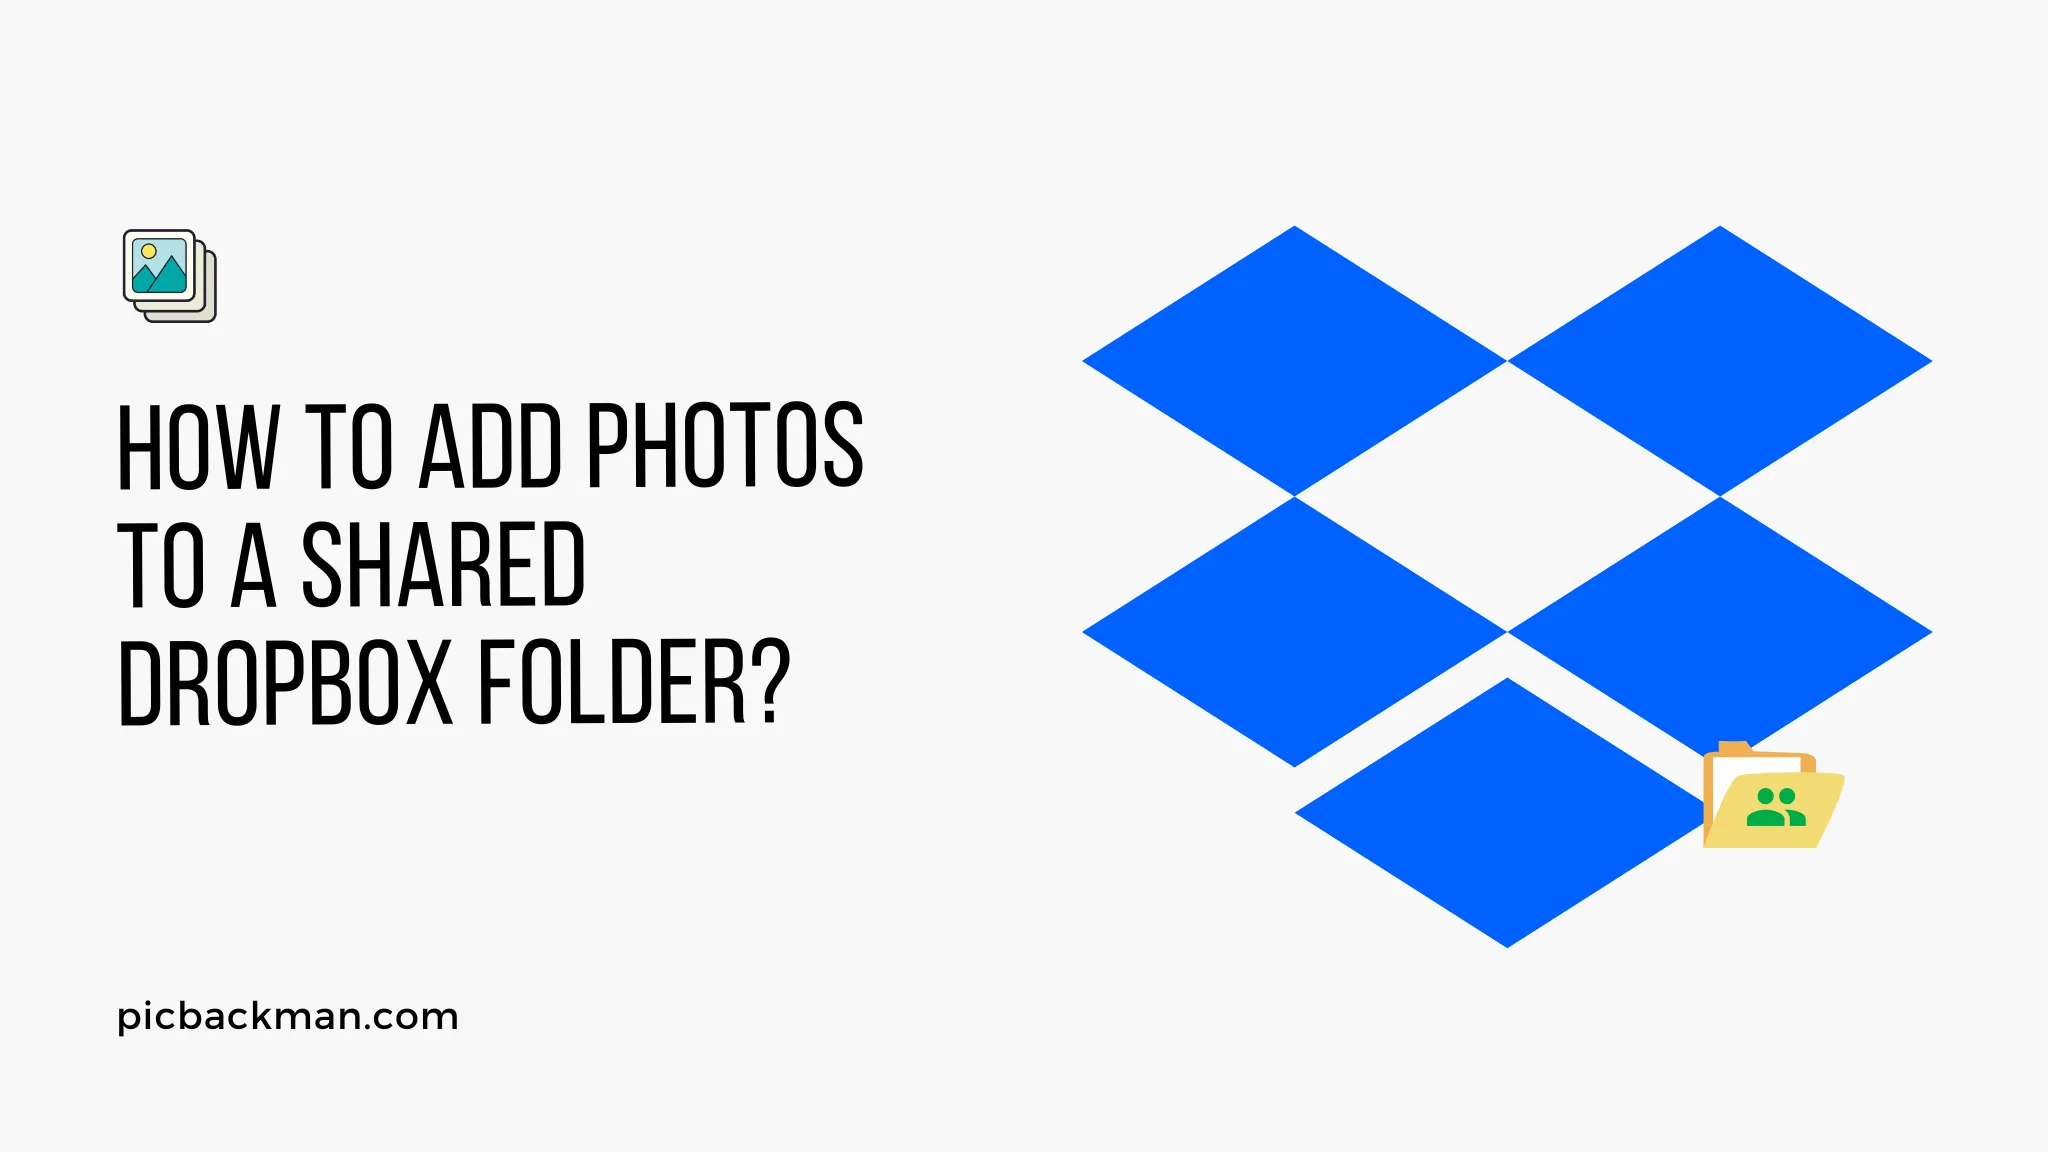 How to Add Photos to a Shared Dropbox Folder?